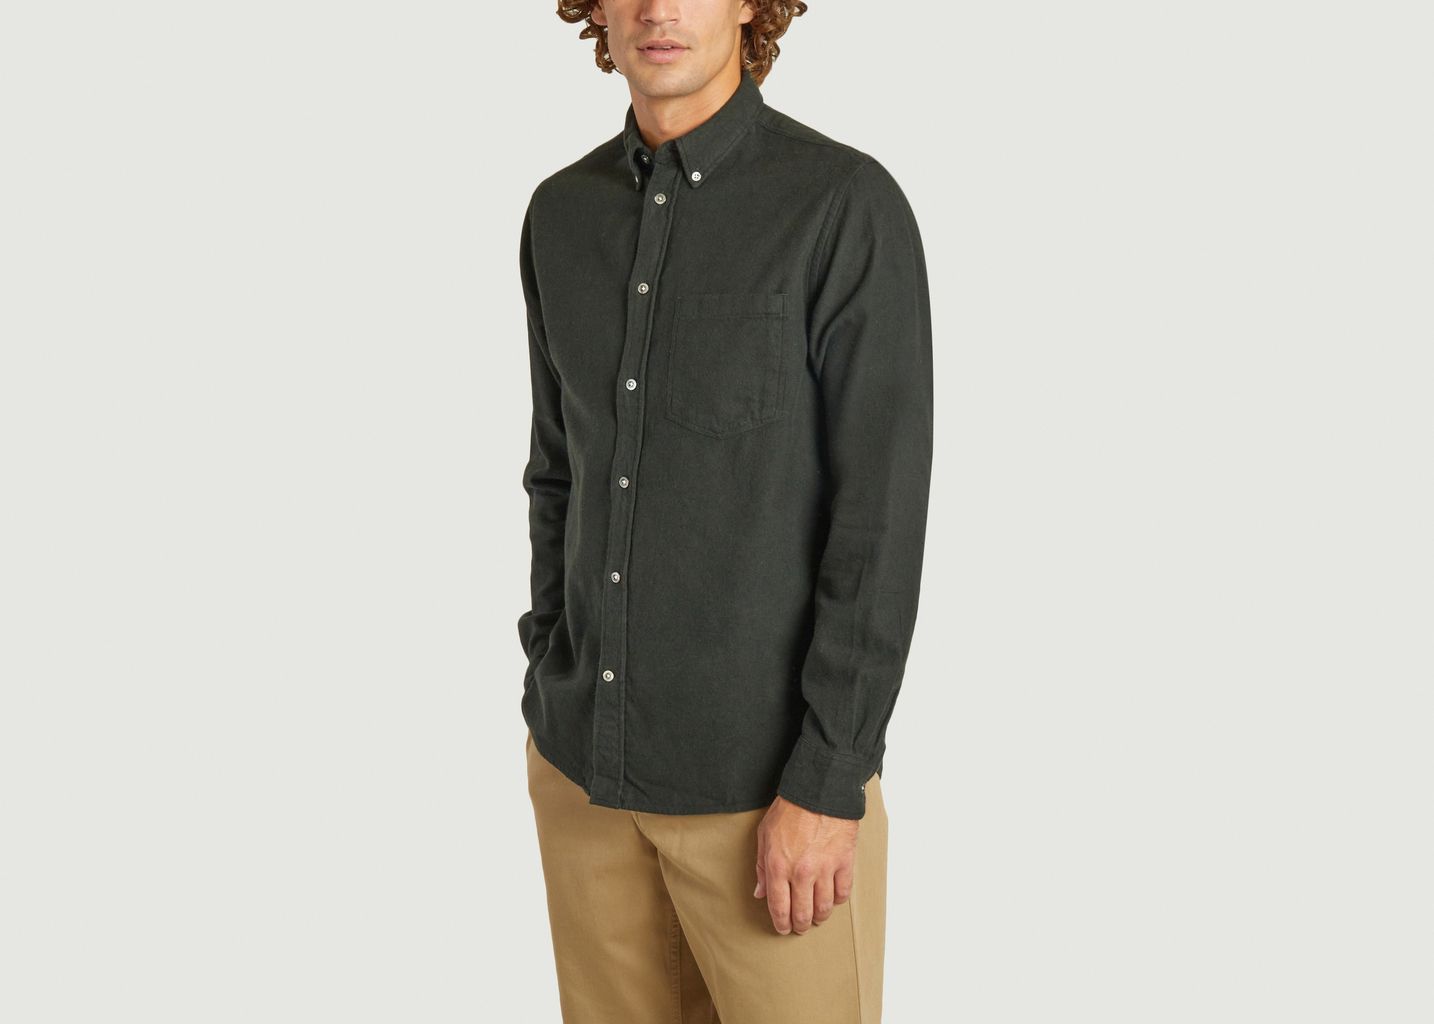 Anton shirt - Norse Projects